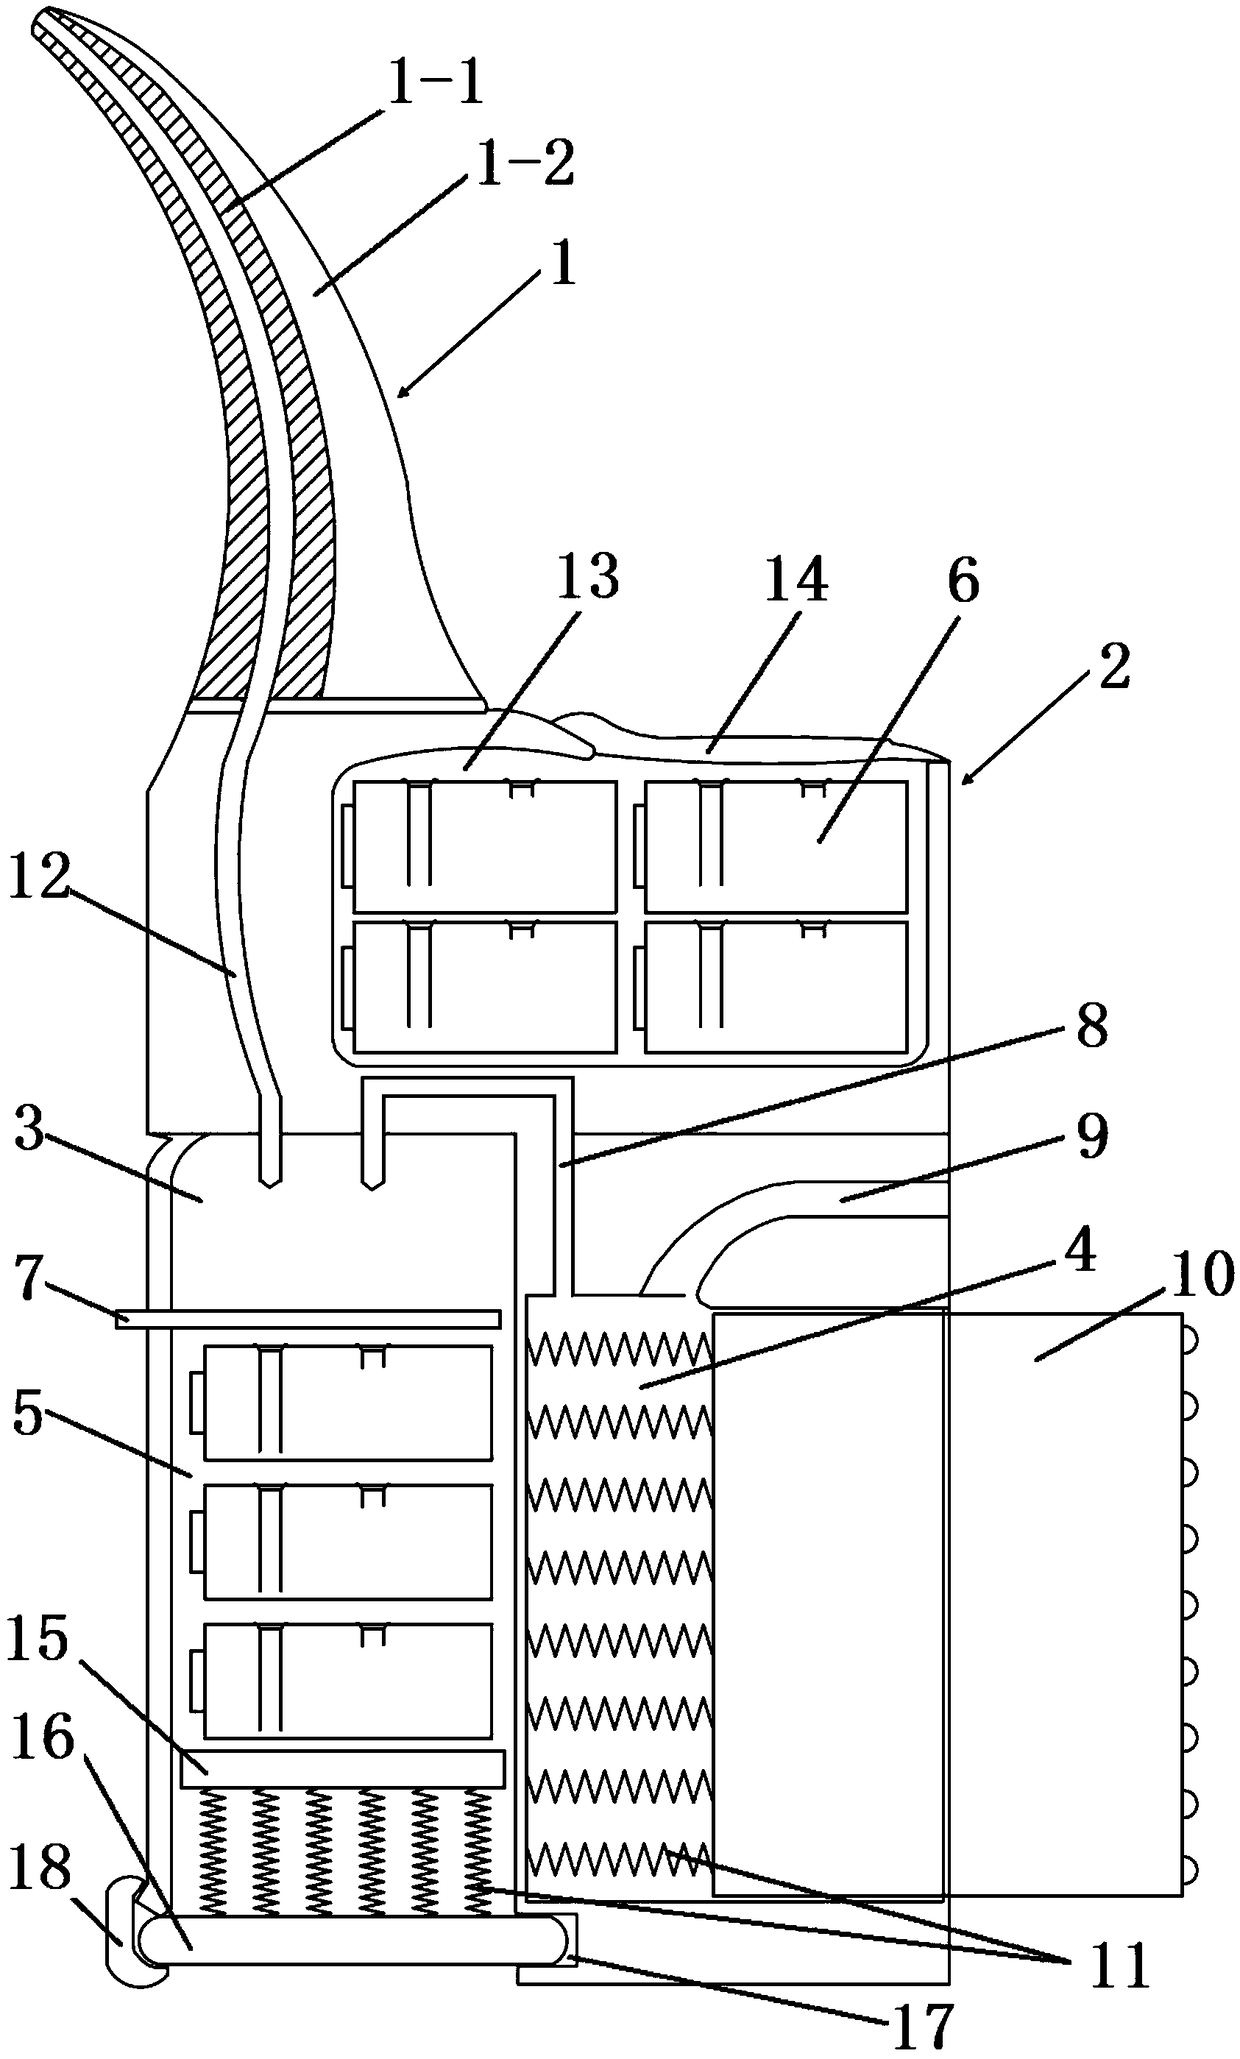 Device for quantitative intranasal brain targeting drug delivery and drug storage containers